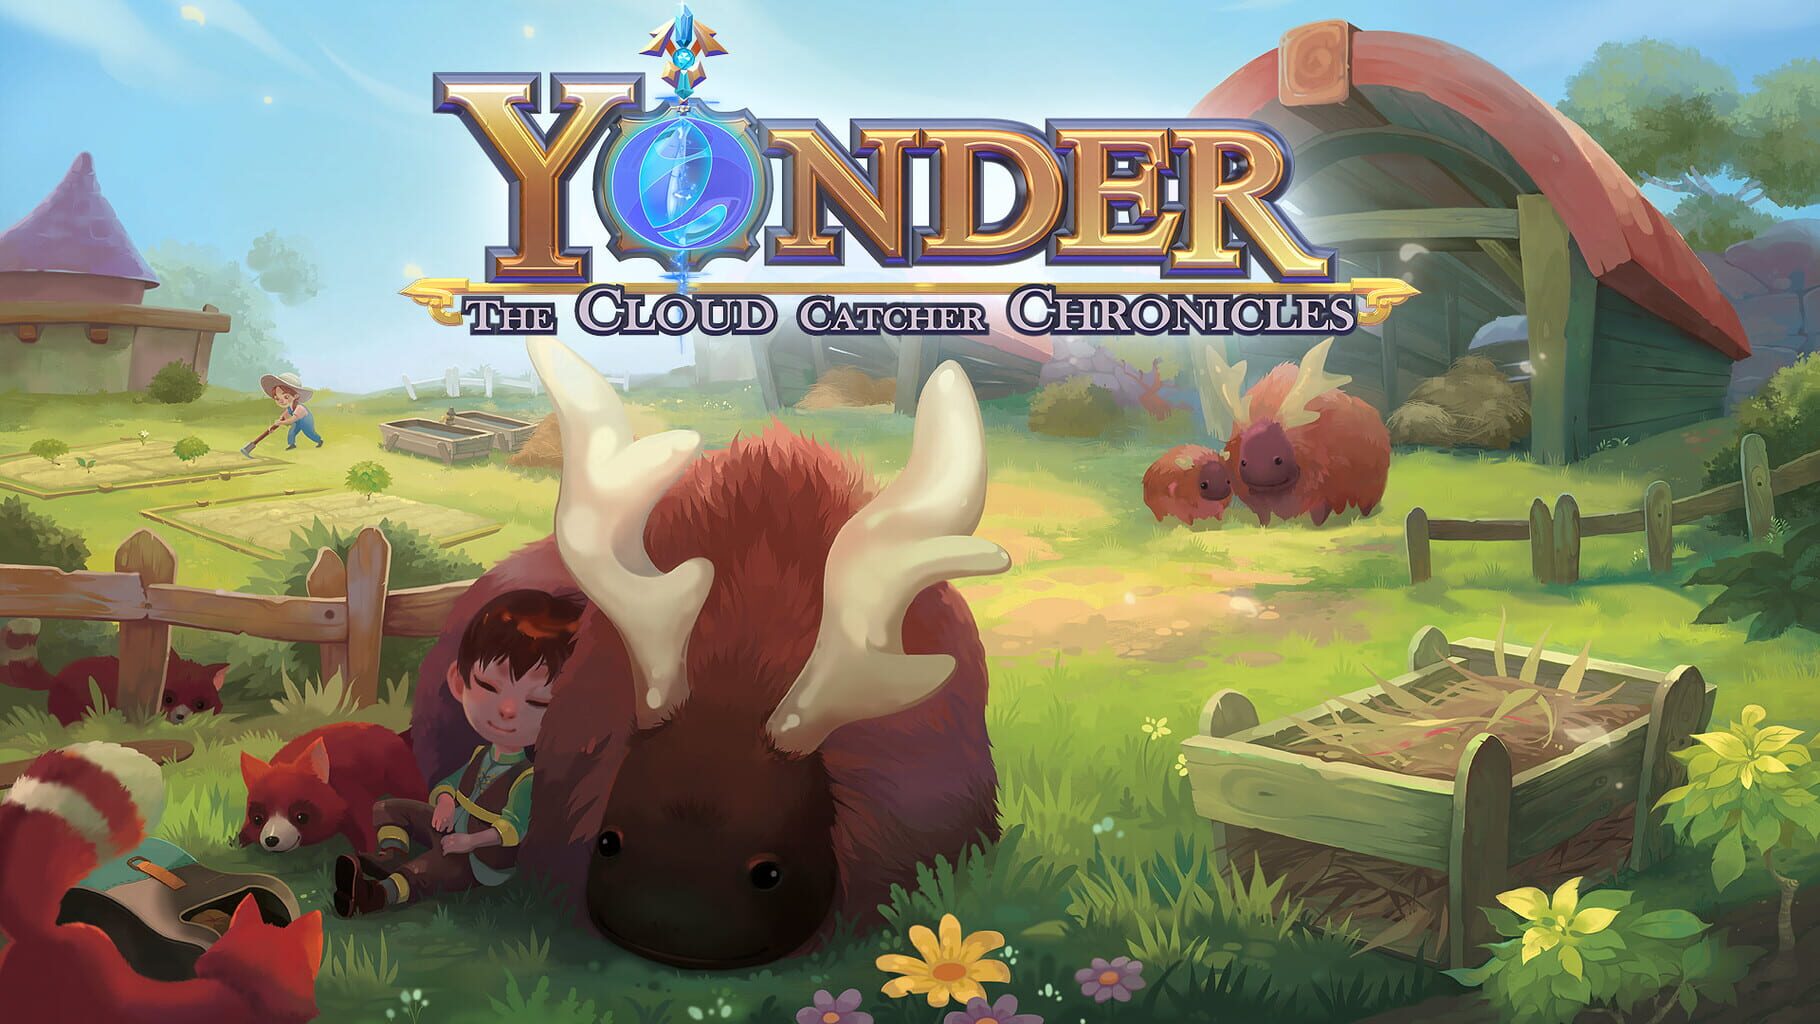 Artwork for Yonder: The Cloud Catcher Chronicles